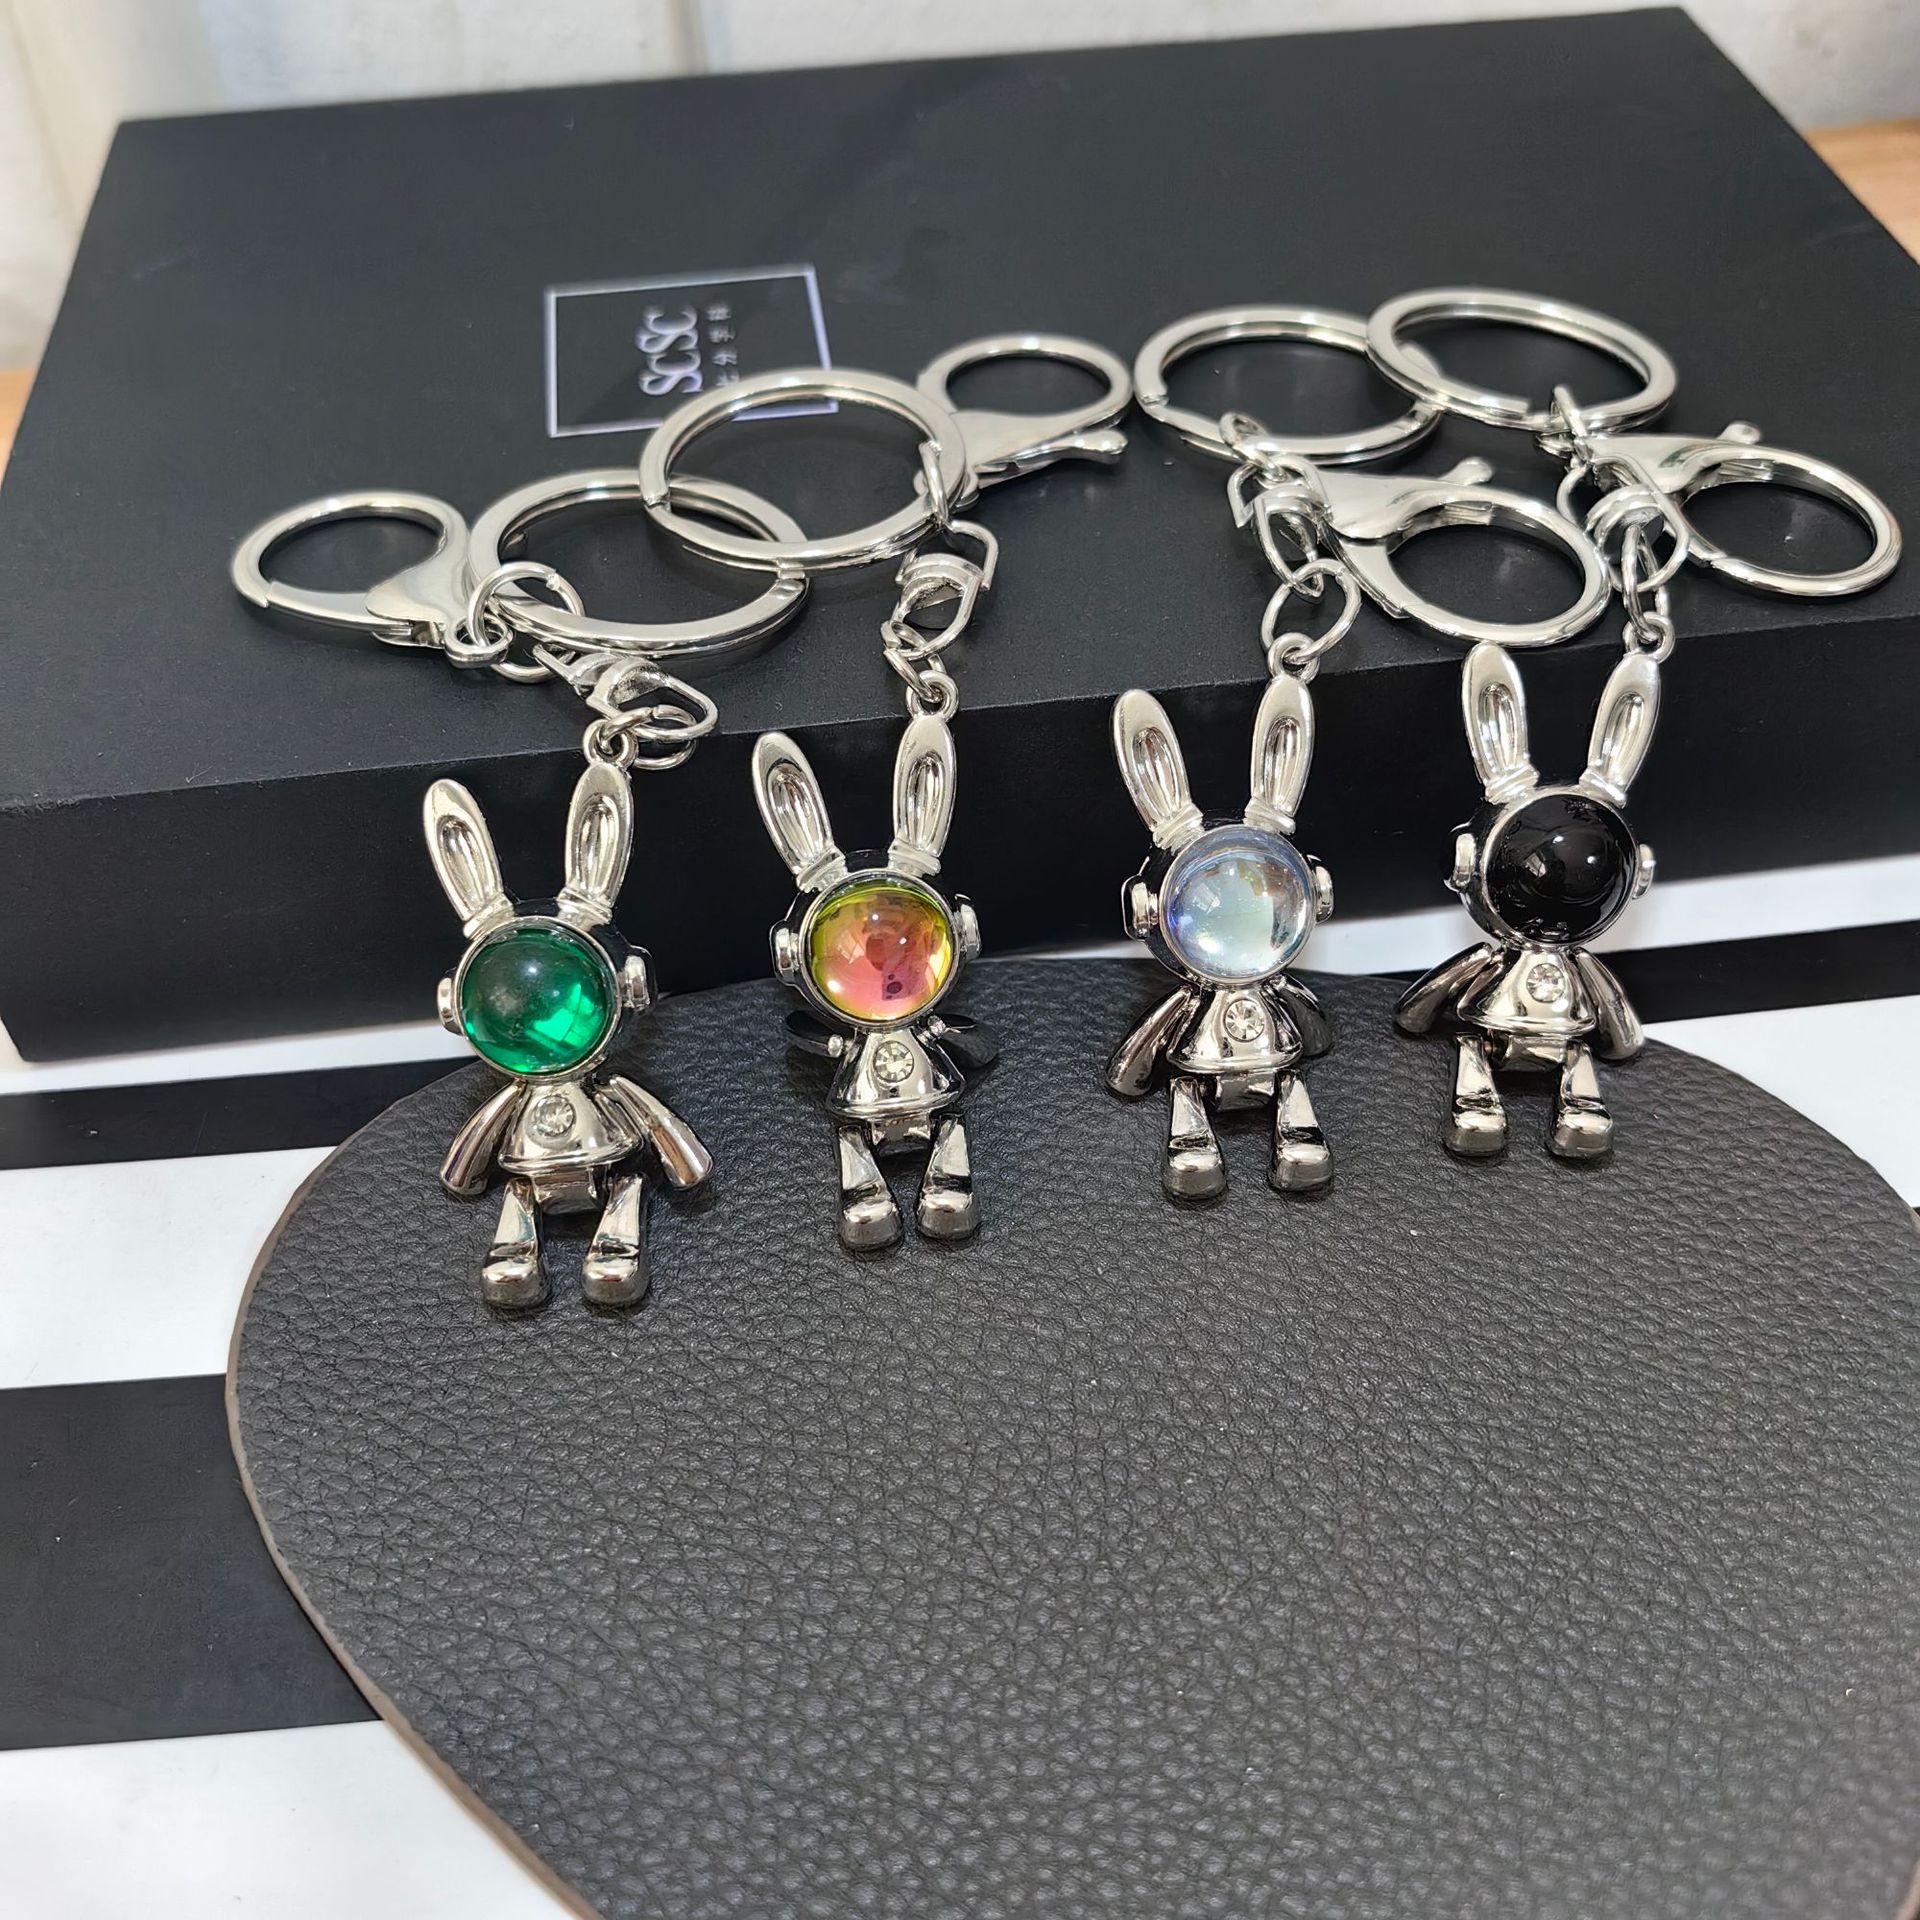 Cross-Border Creative Cartoon New Colorful Space Rabbit Alloy Keychain Personalized Bag Key Chain Hanging Jewelry